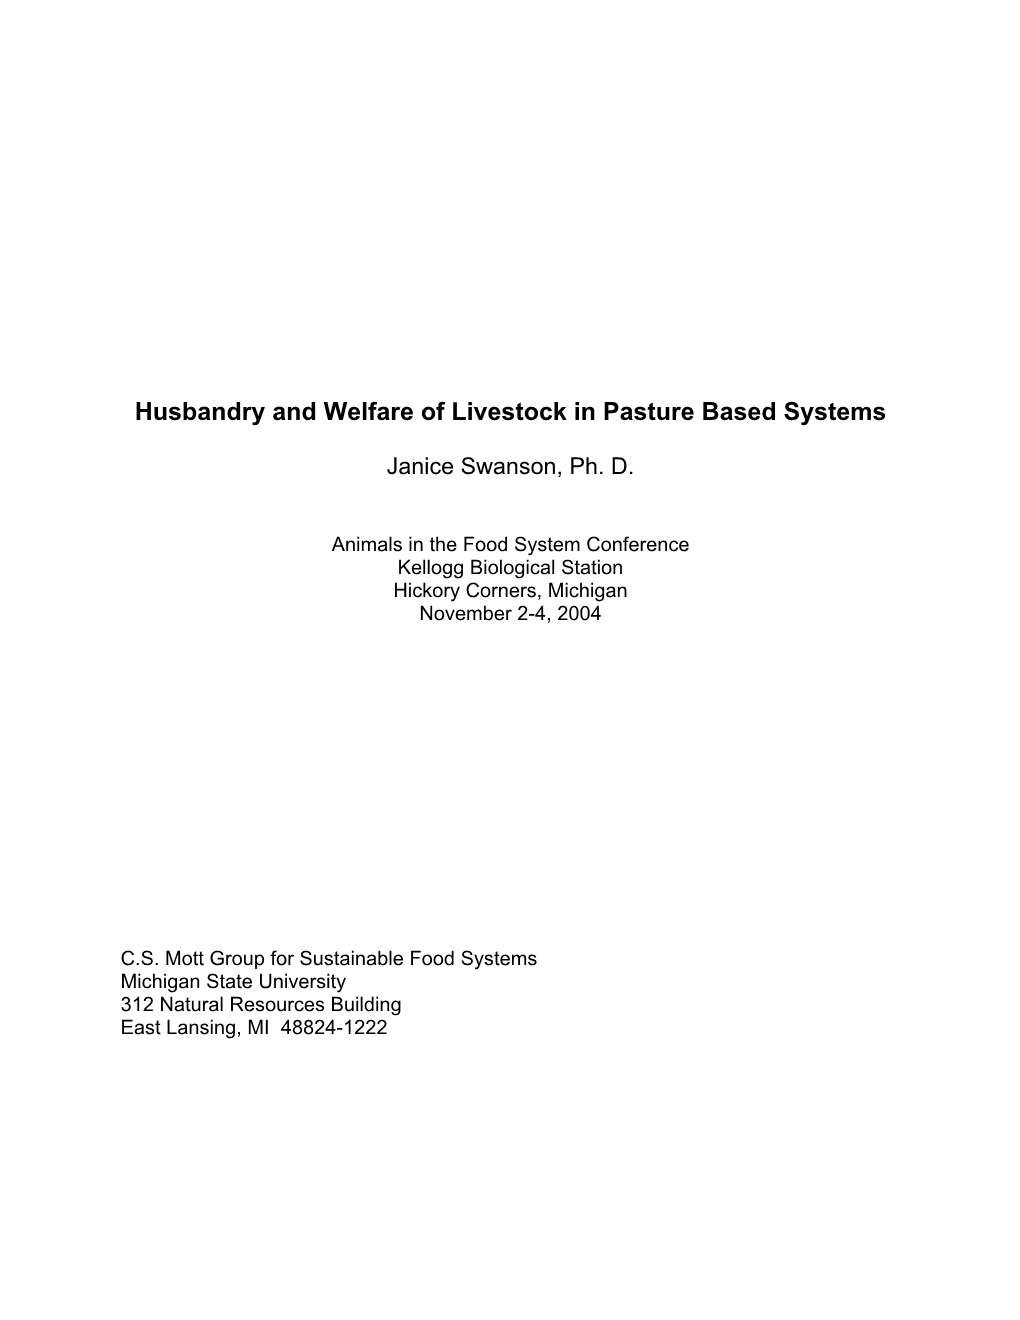 Husbandry and Welfare of Livestock in Pasture Based Systems